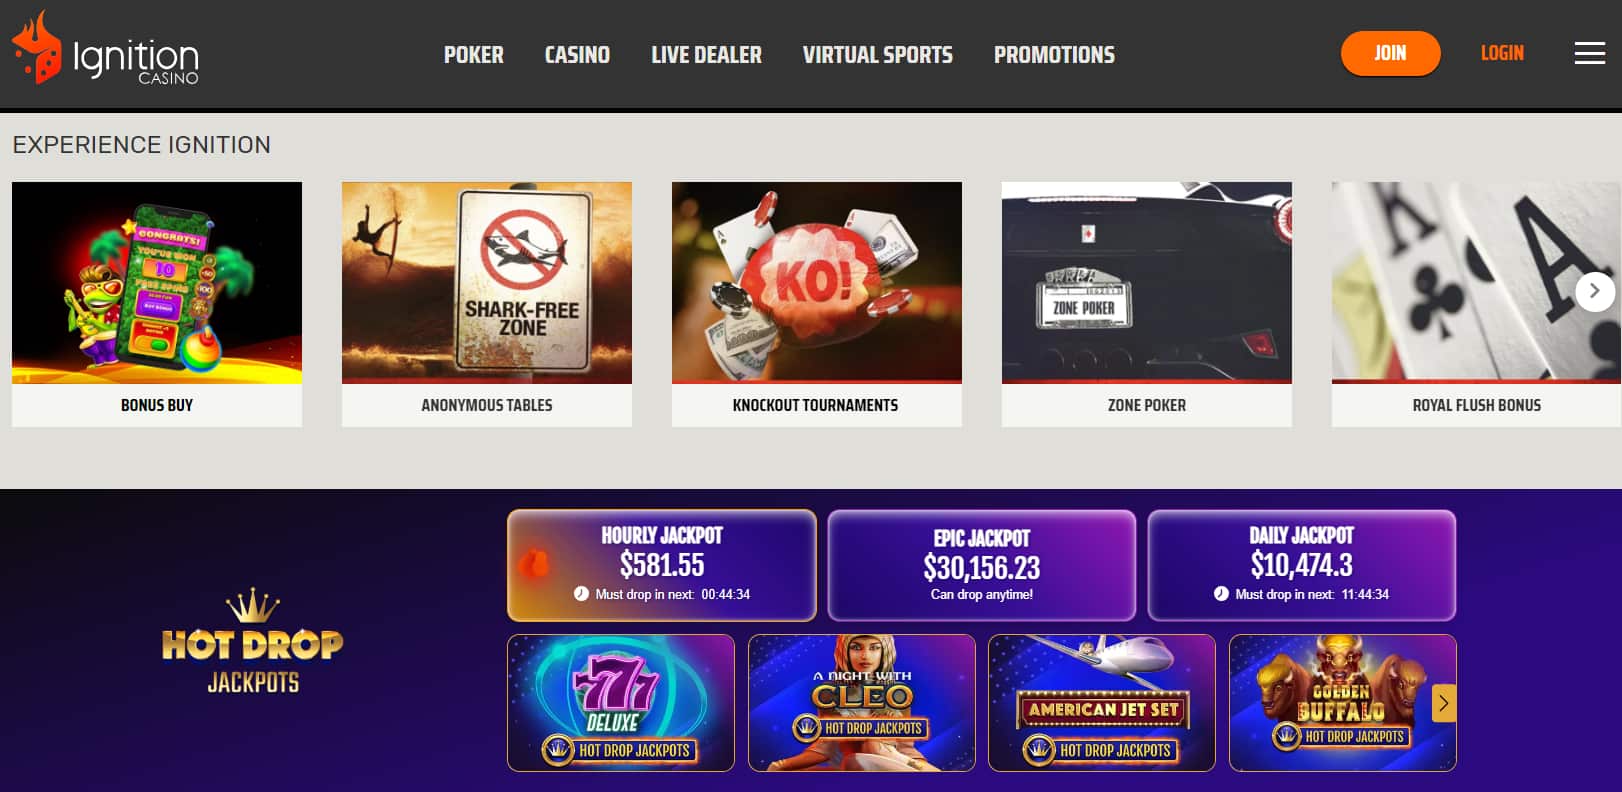 offshore gambling partners ignition casino site hot drop jackpots